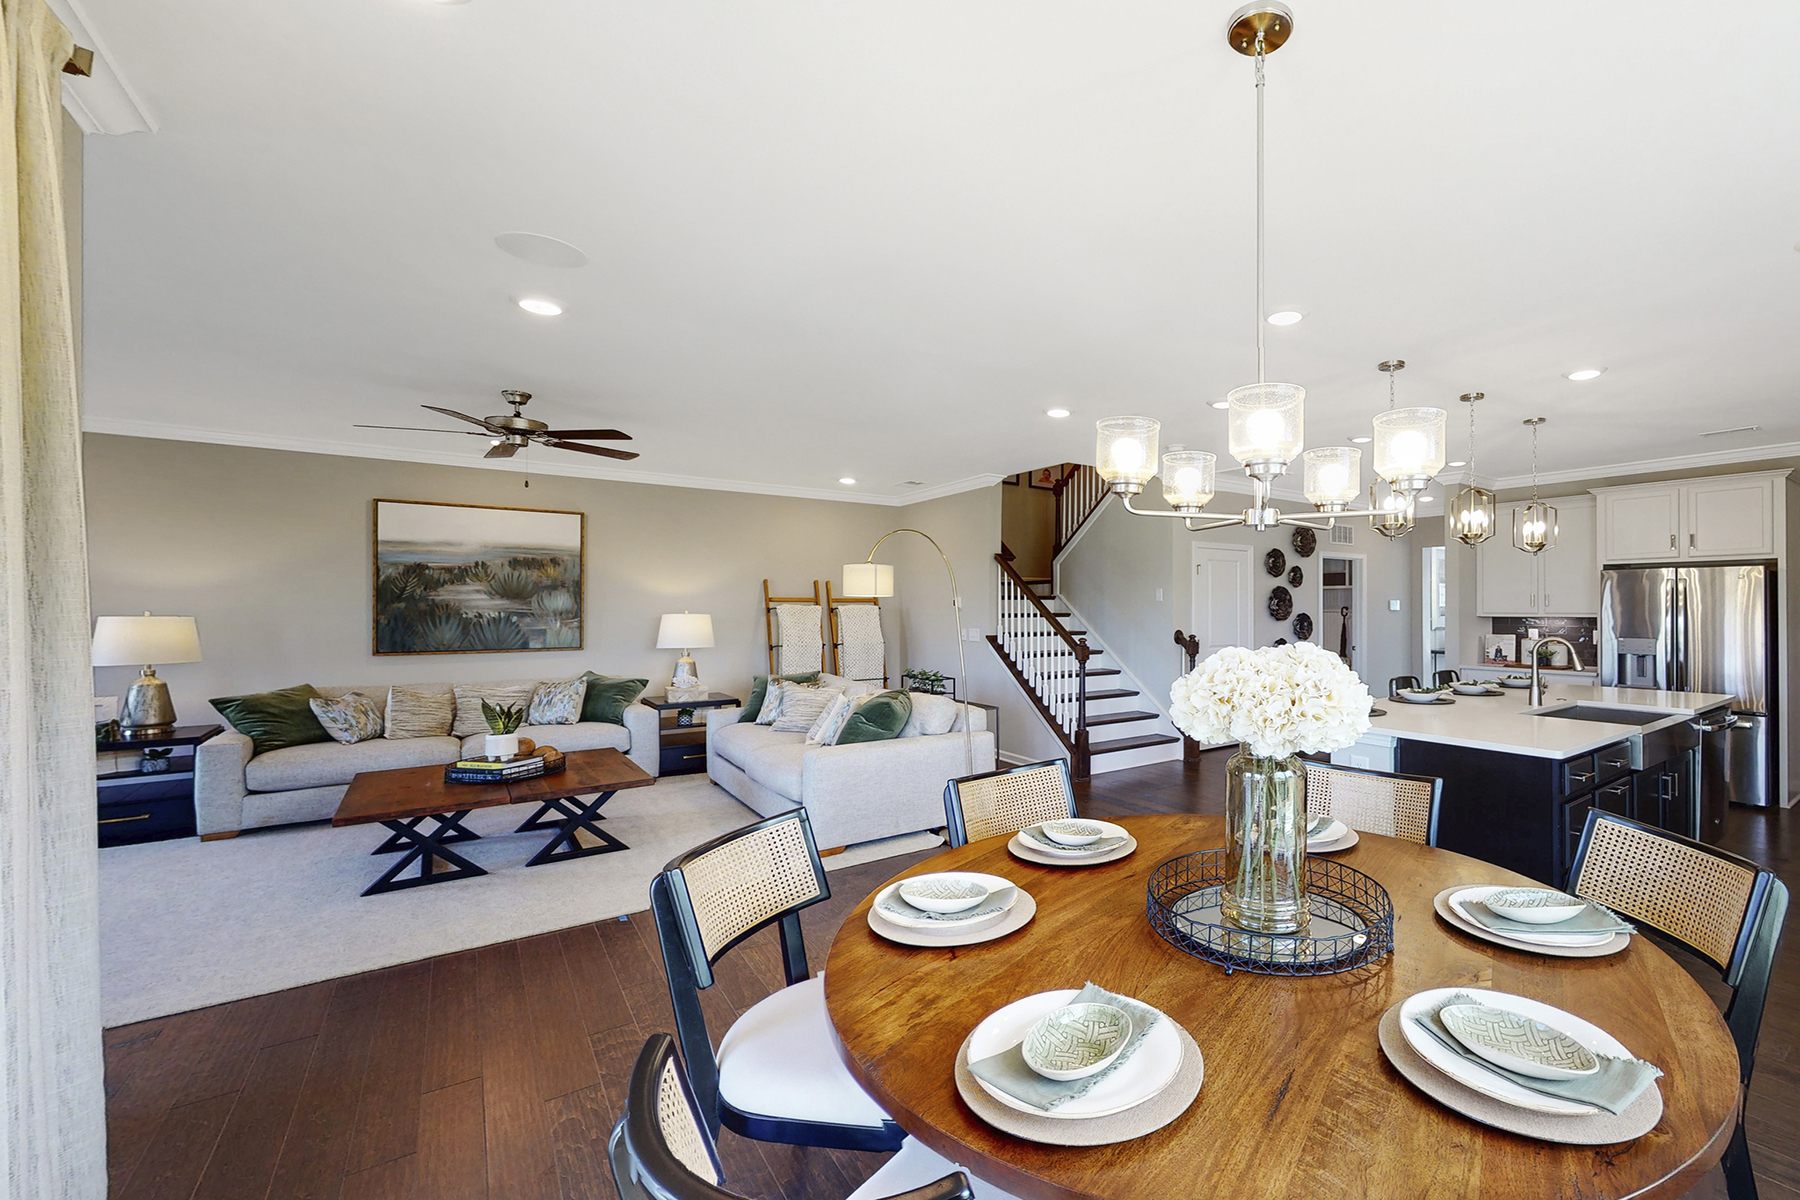 Interior Design Ideas from Our Sonoma Model to Better M/I Homes